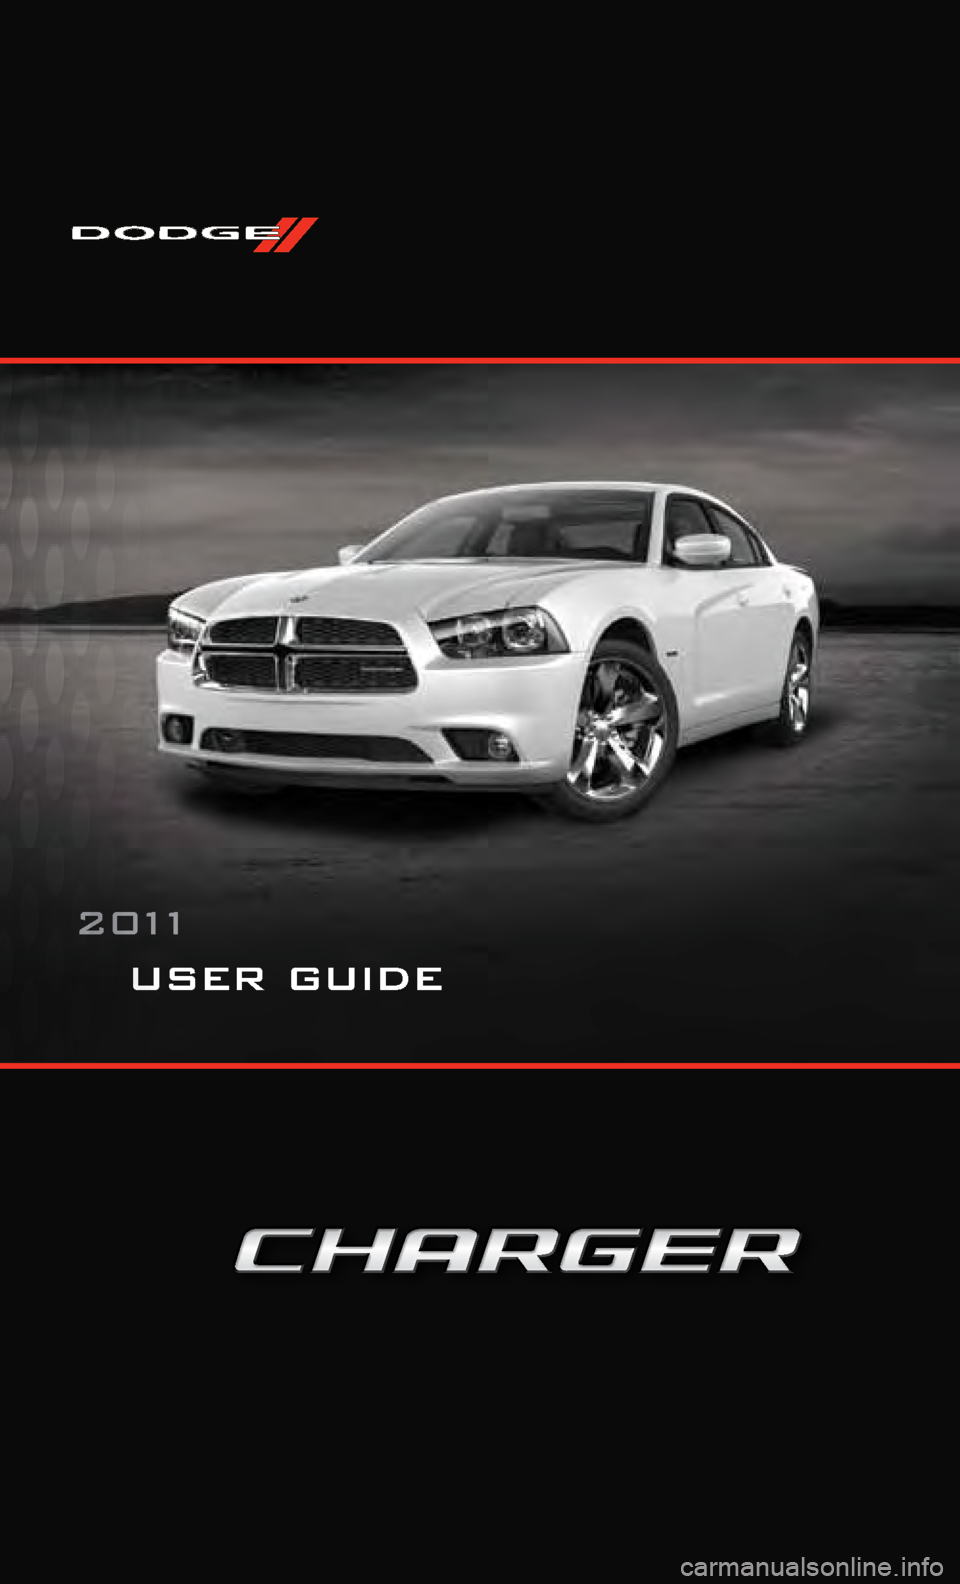 DODGE CHARGER 2011 7.G Owners Manual user guide
2 0 11    